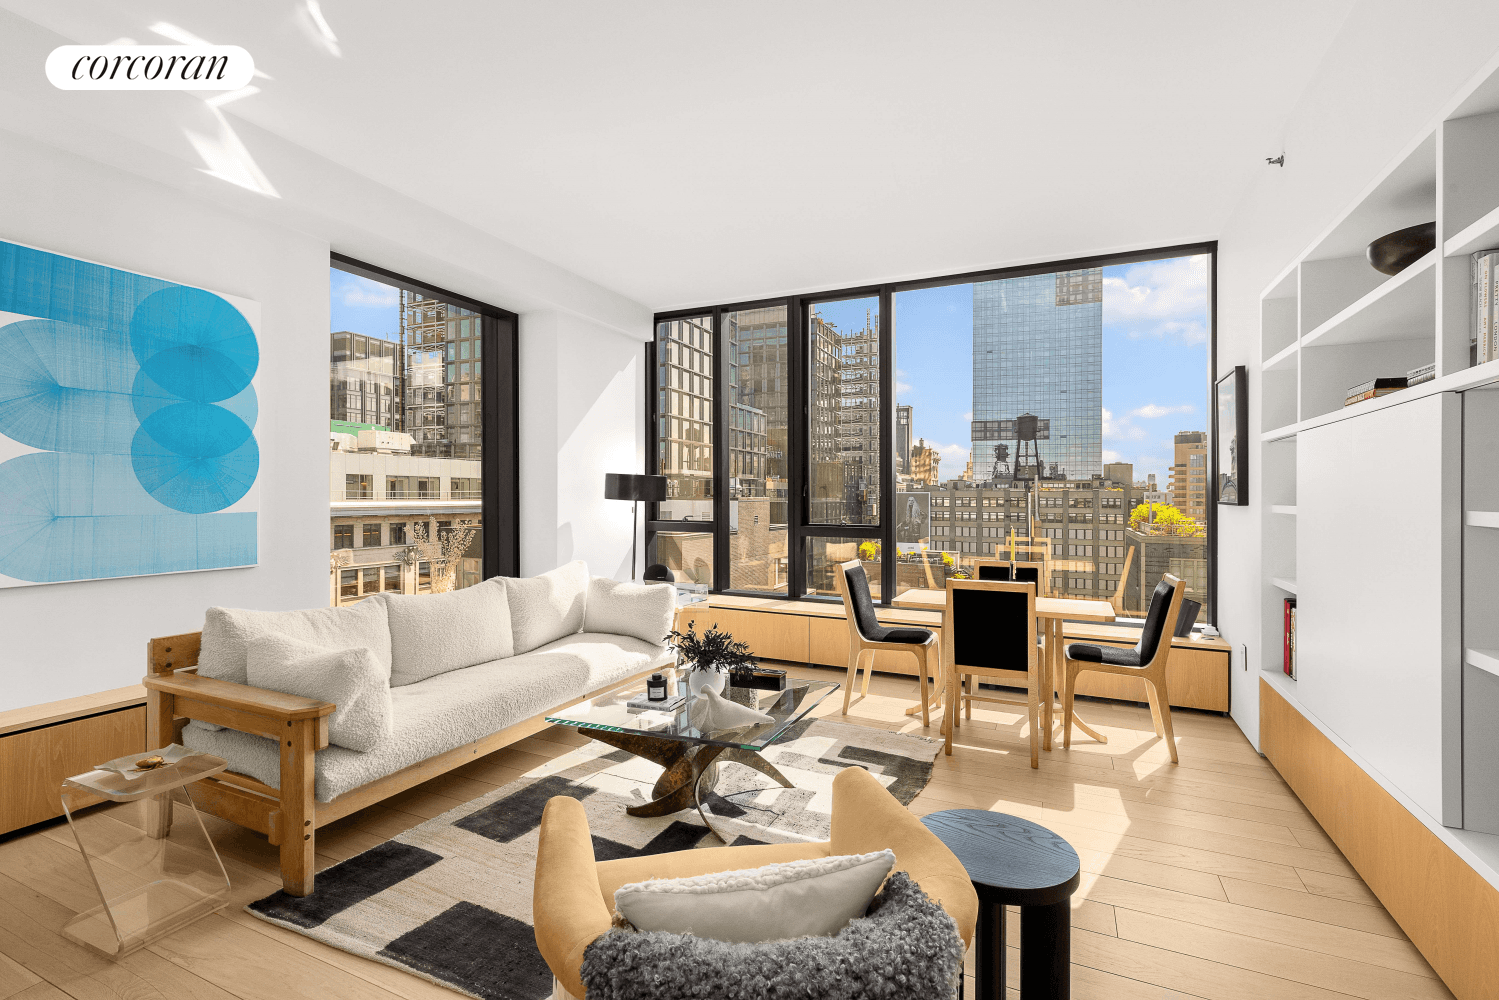 Introducing residence 14E this sun drenched and impeccably designed high floor 2 bedroom, 2 bath apartment has been masterfully renovated by AD100 Designer Saffron Case.